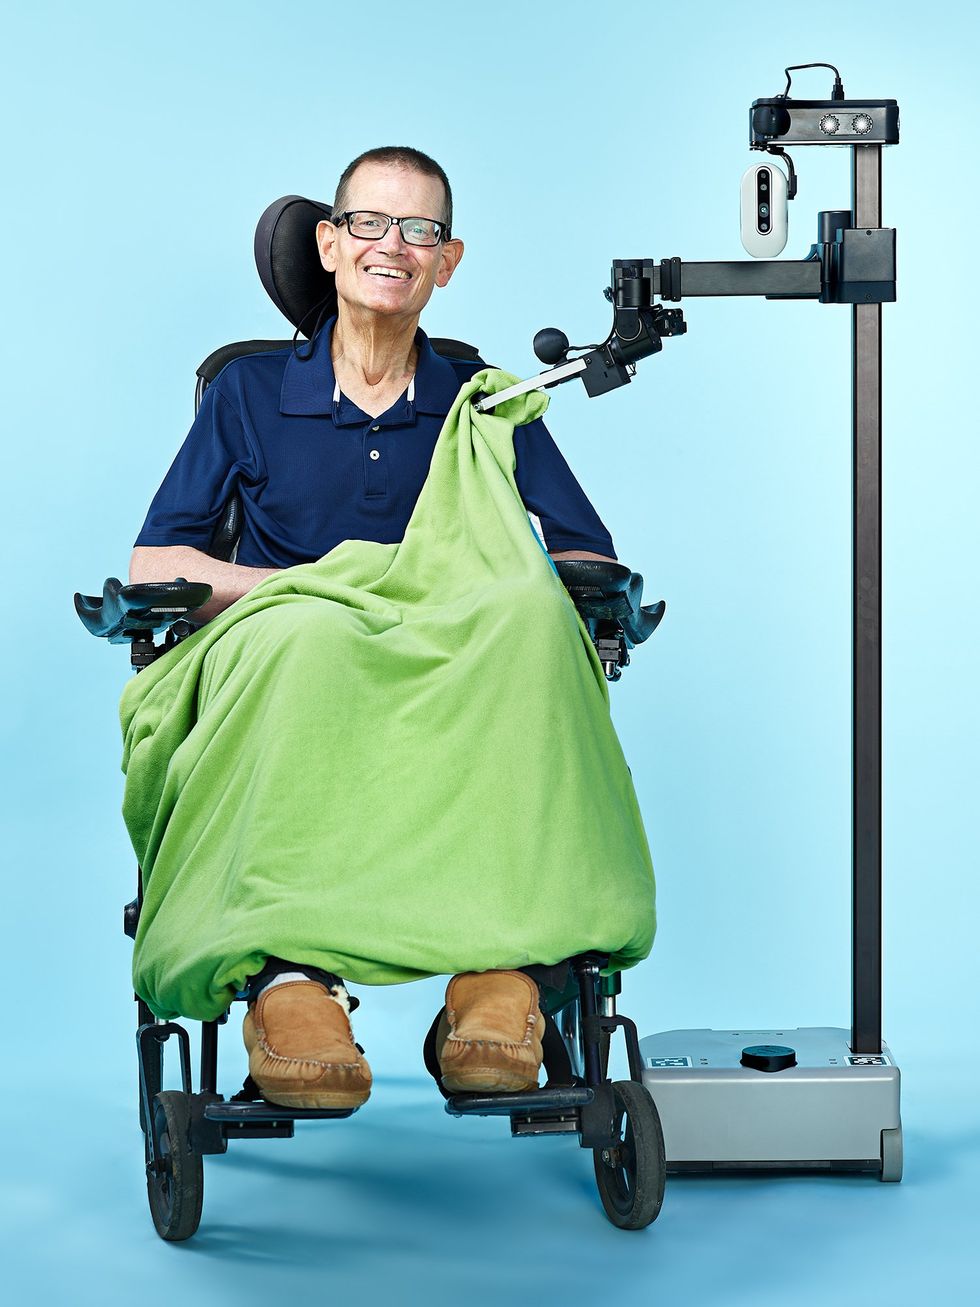 A smiling bespectacled man in a wheelchair is seated next to a robot consisting of a mobile base, a thin vertical pole, and a horizontal arm, whose gripper is repositioning a green blanket on the man\u2019s lap.